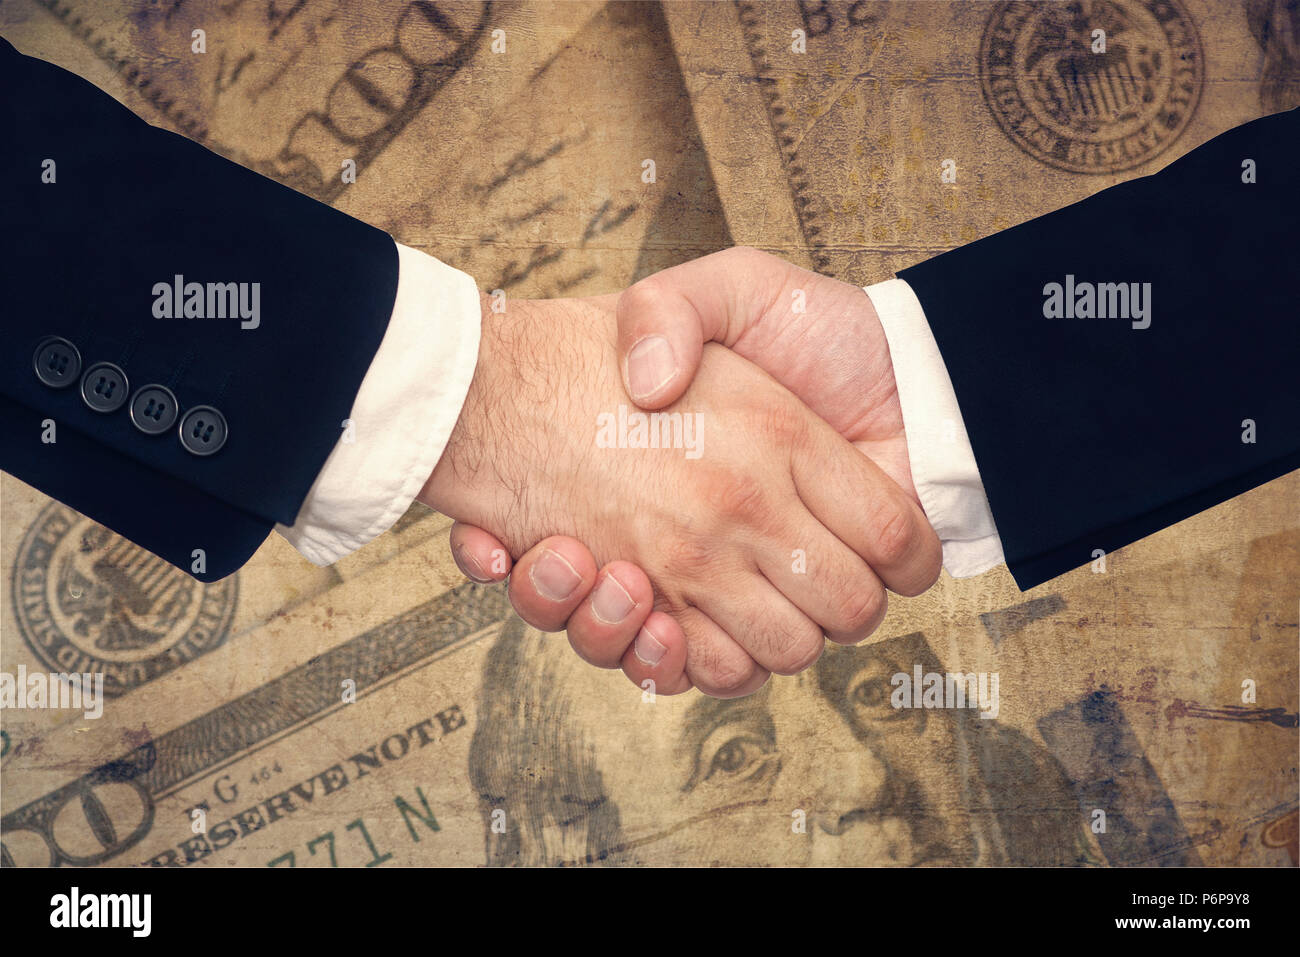 Business agrement concept Stock Photo